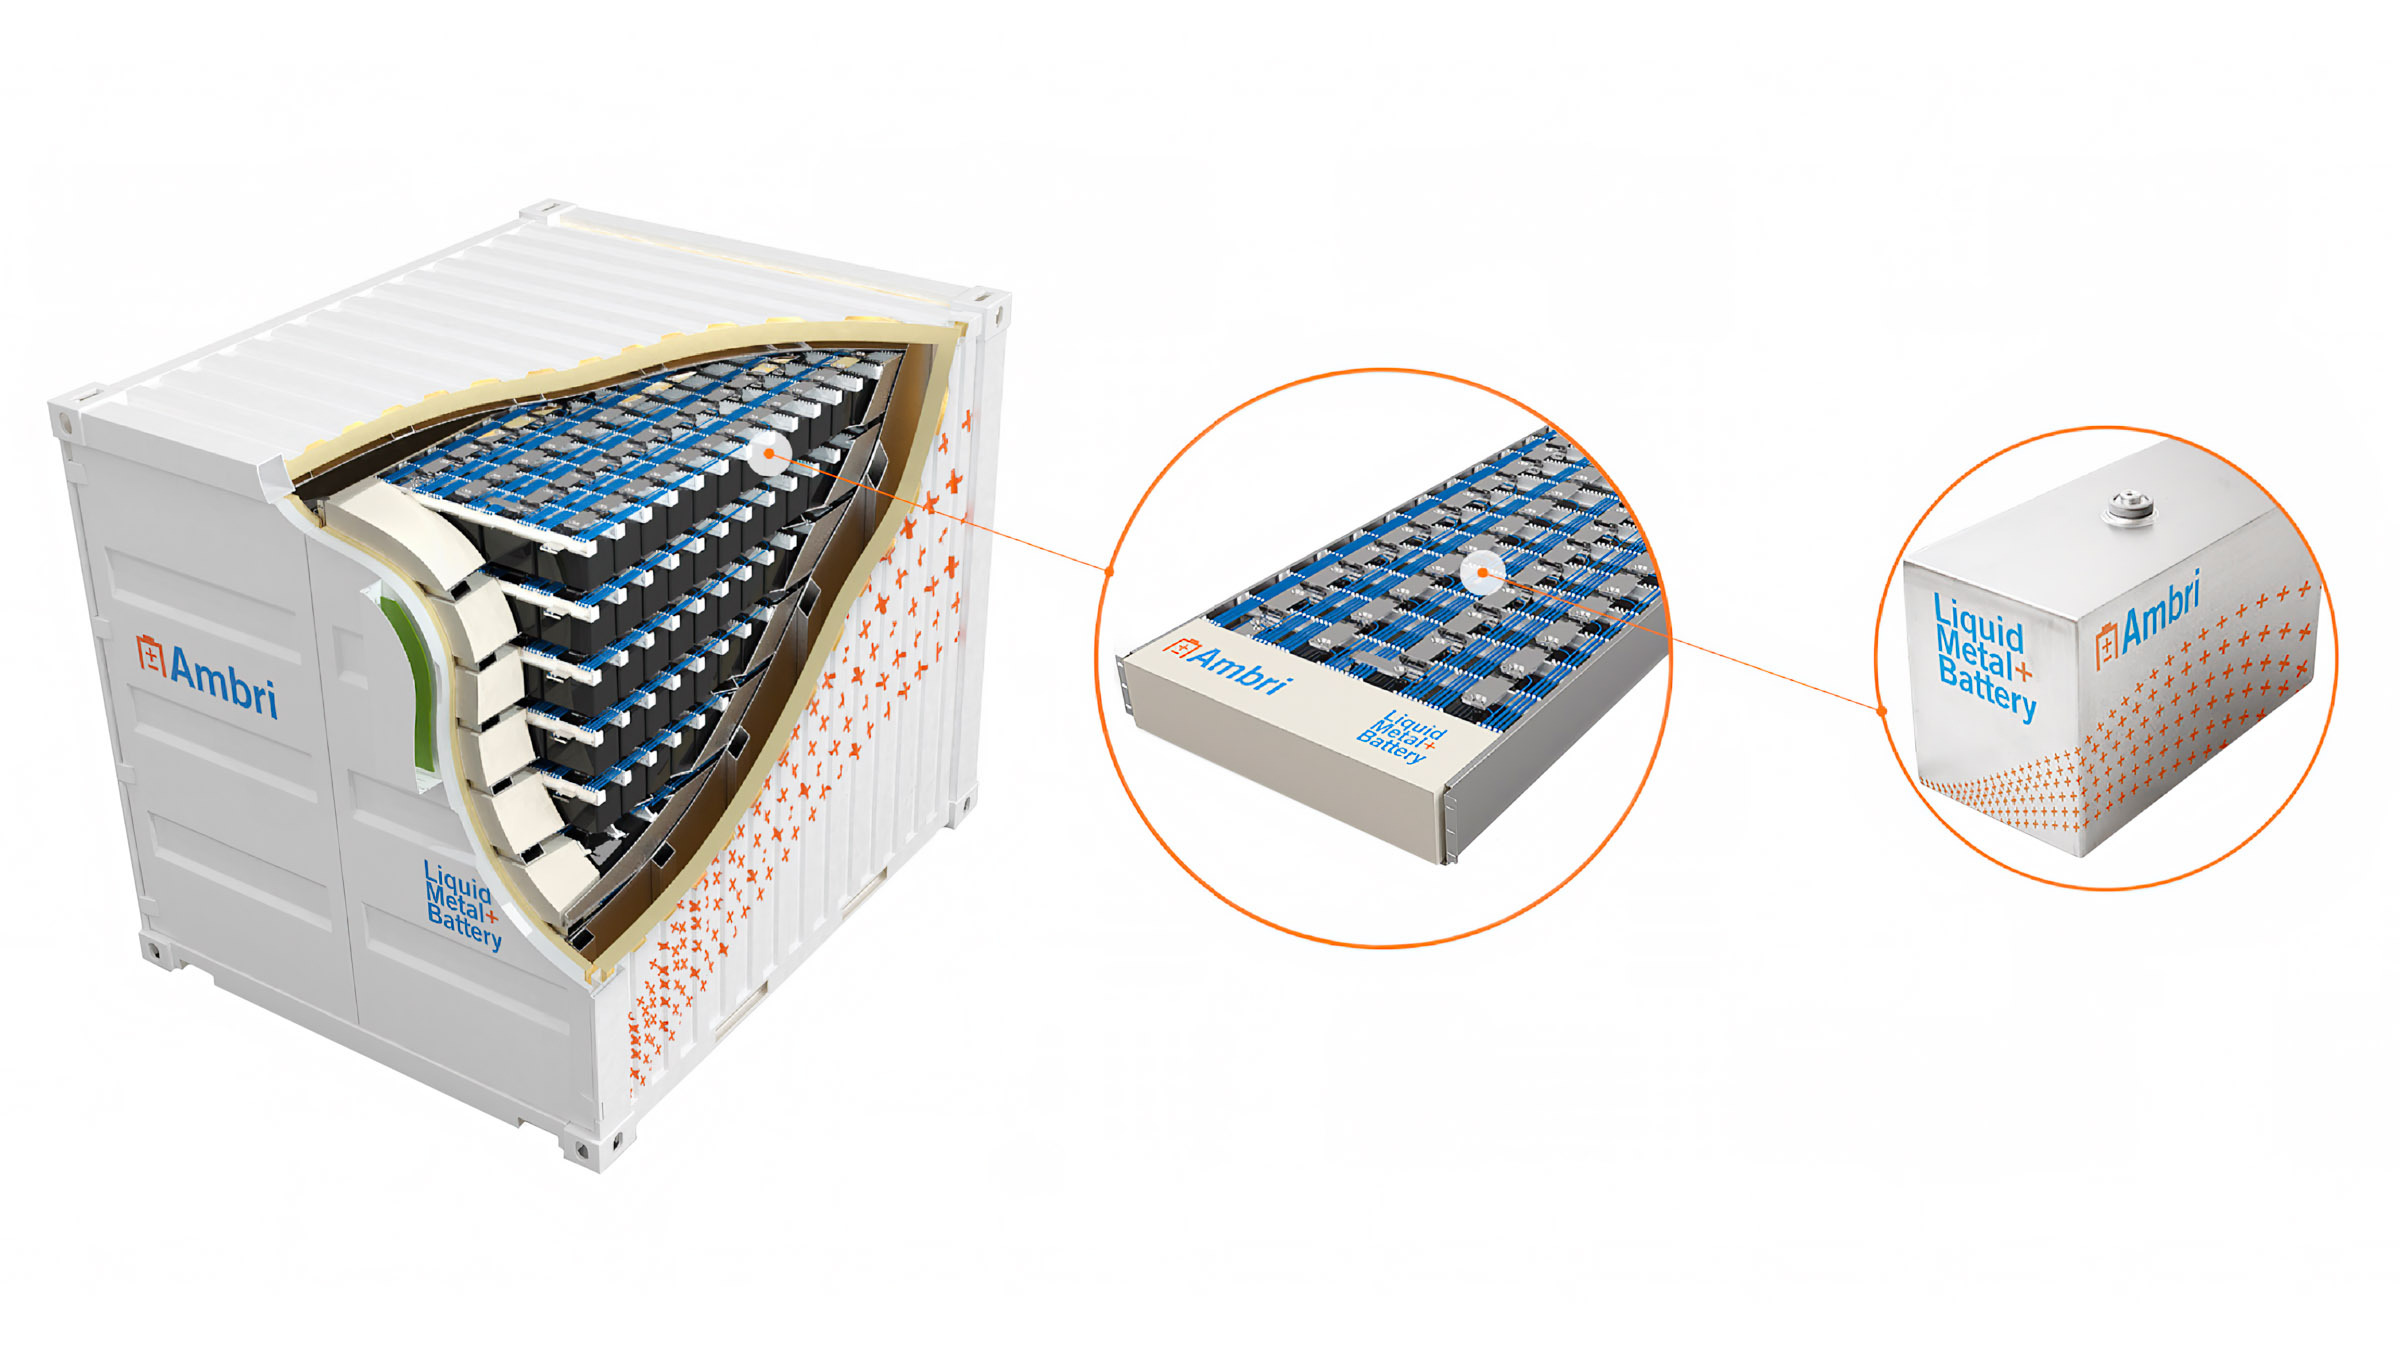 Ambri&#039;s molten salt batteries are the size of a metal lunchbox, and can be strung together into container-sized energy storage systems.